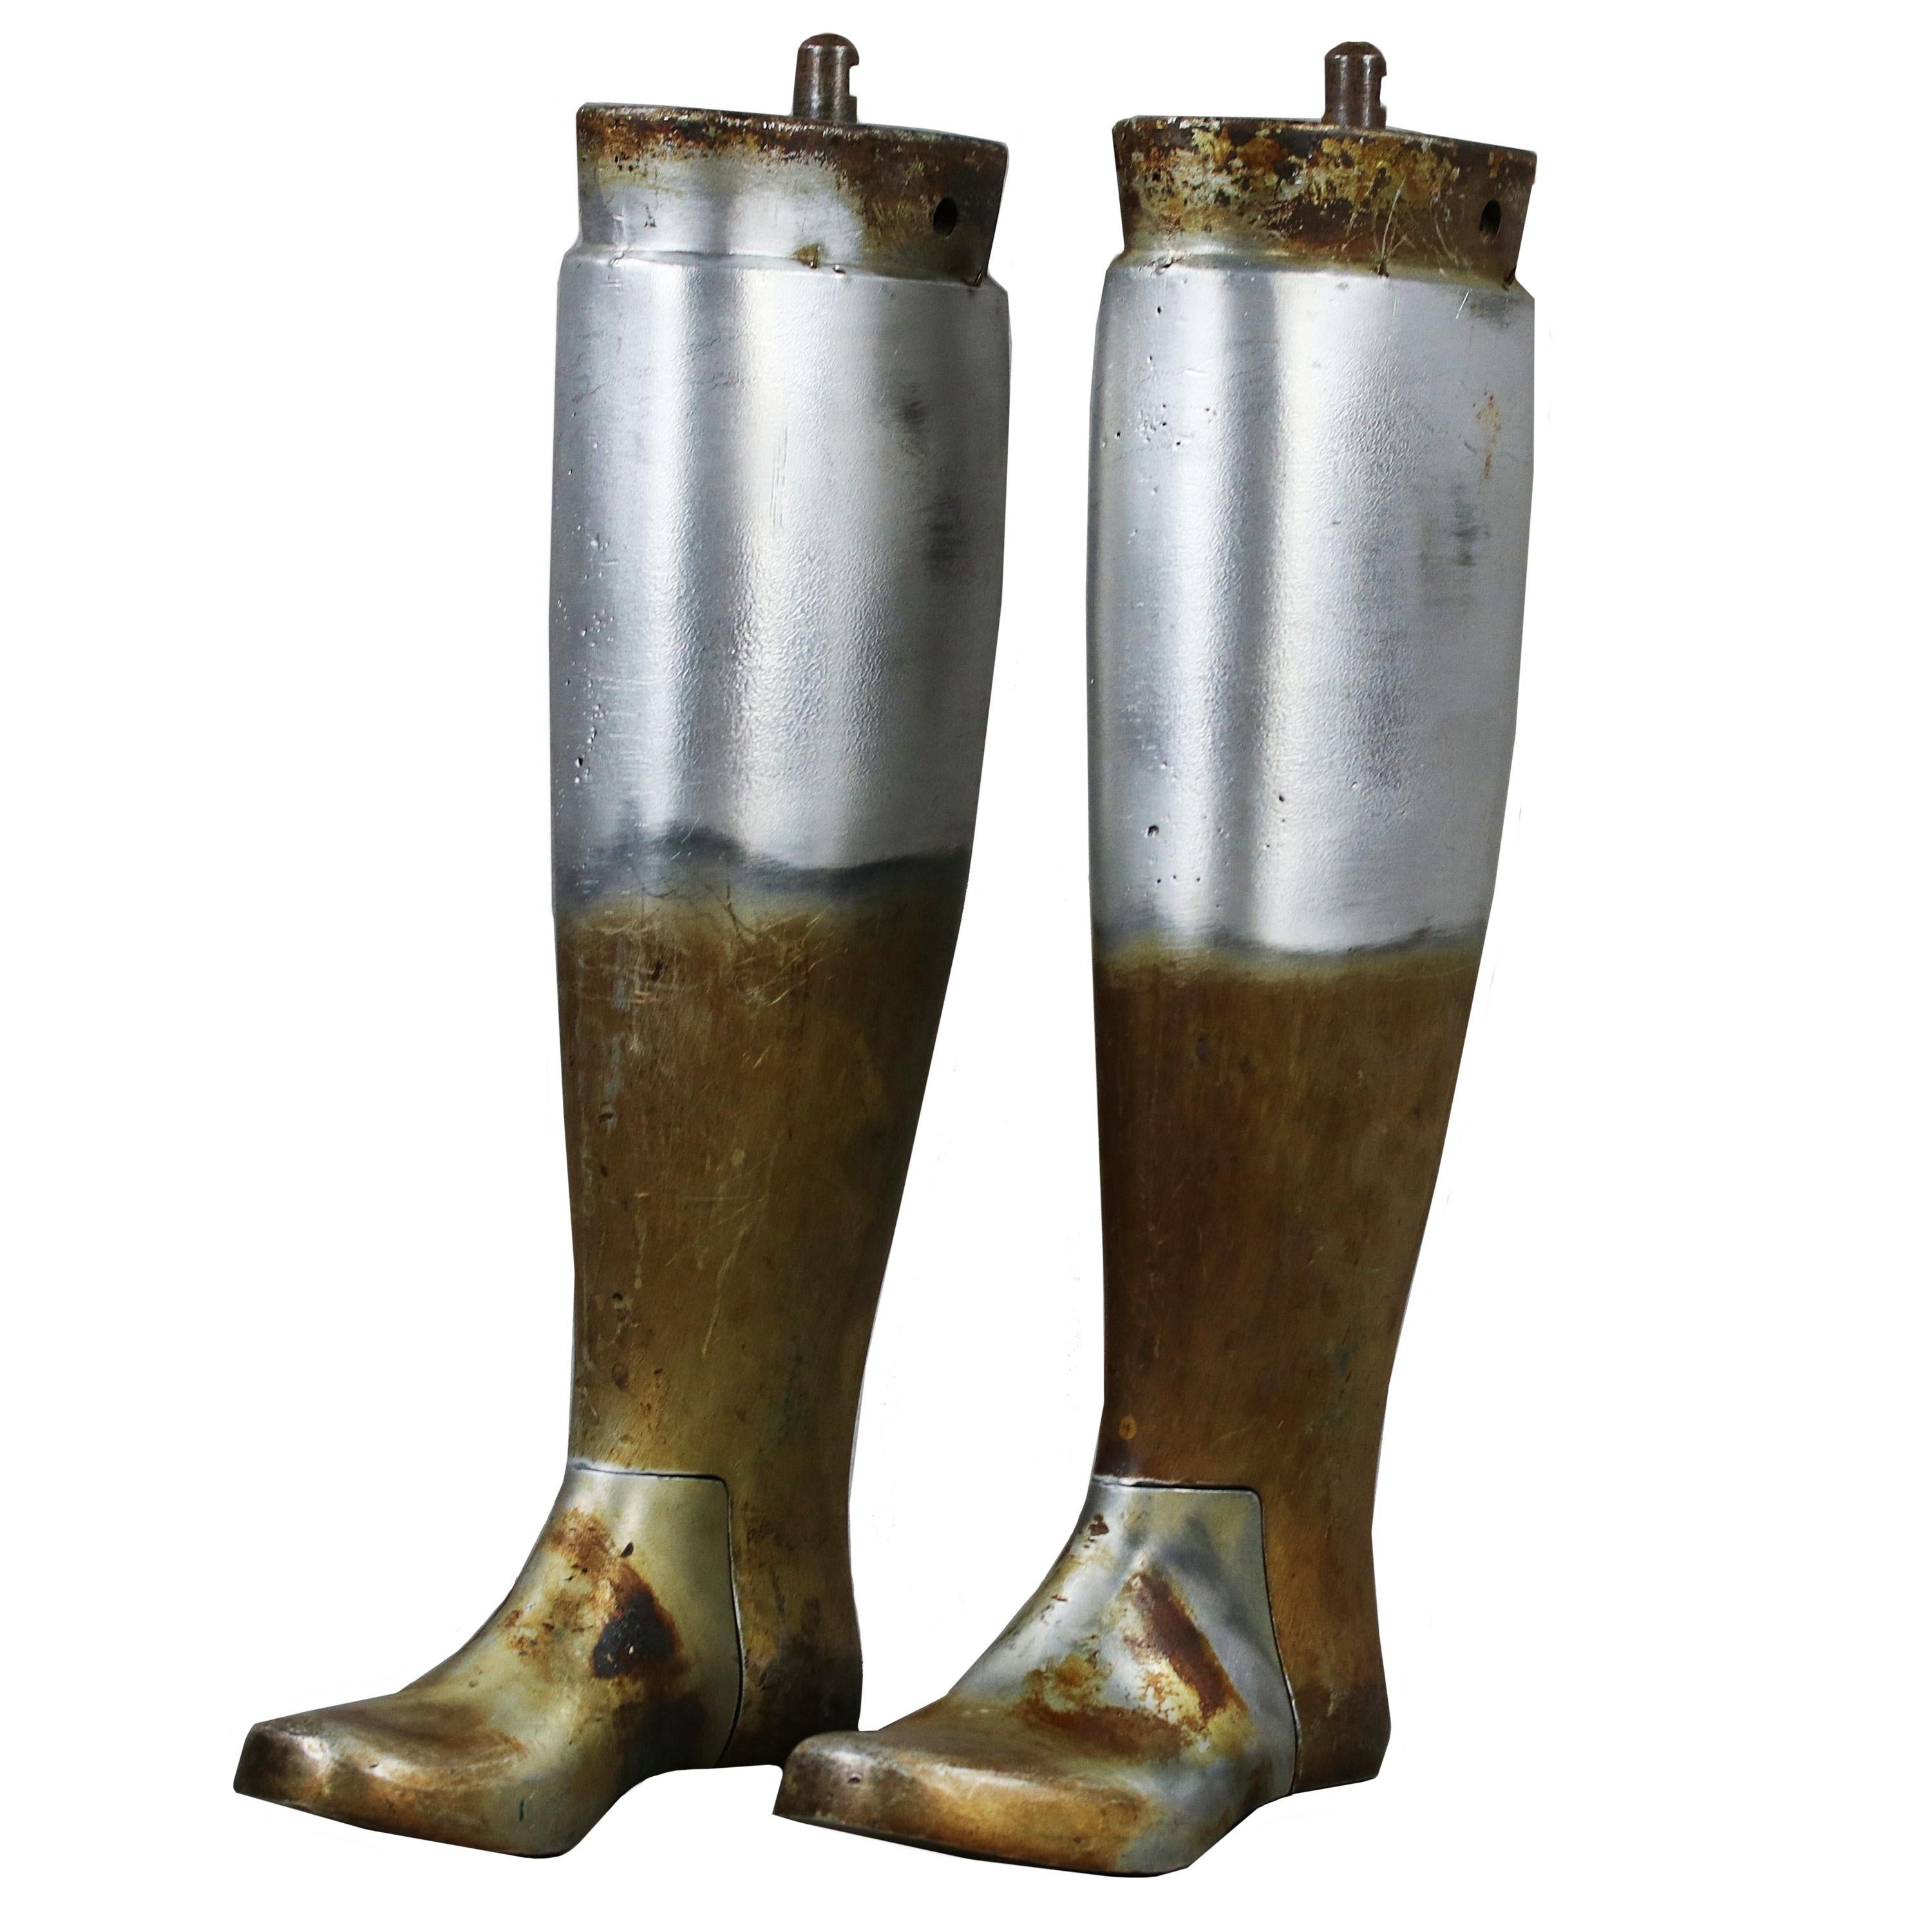 Swedish Industrial Boot Molds Made in Aluminium and Steel for a Factory in Sweden